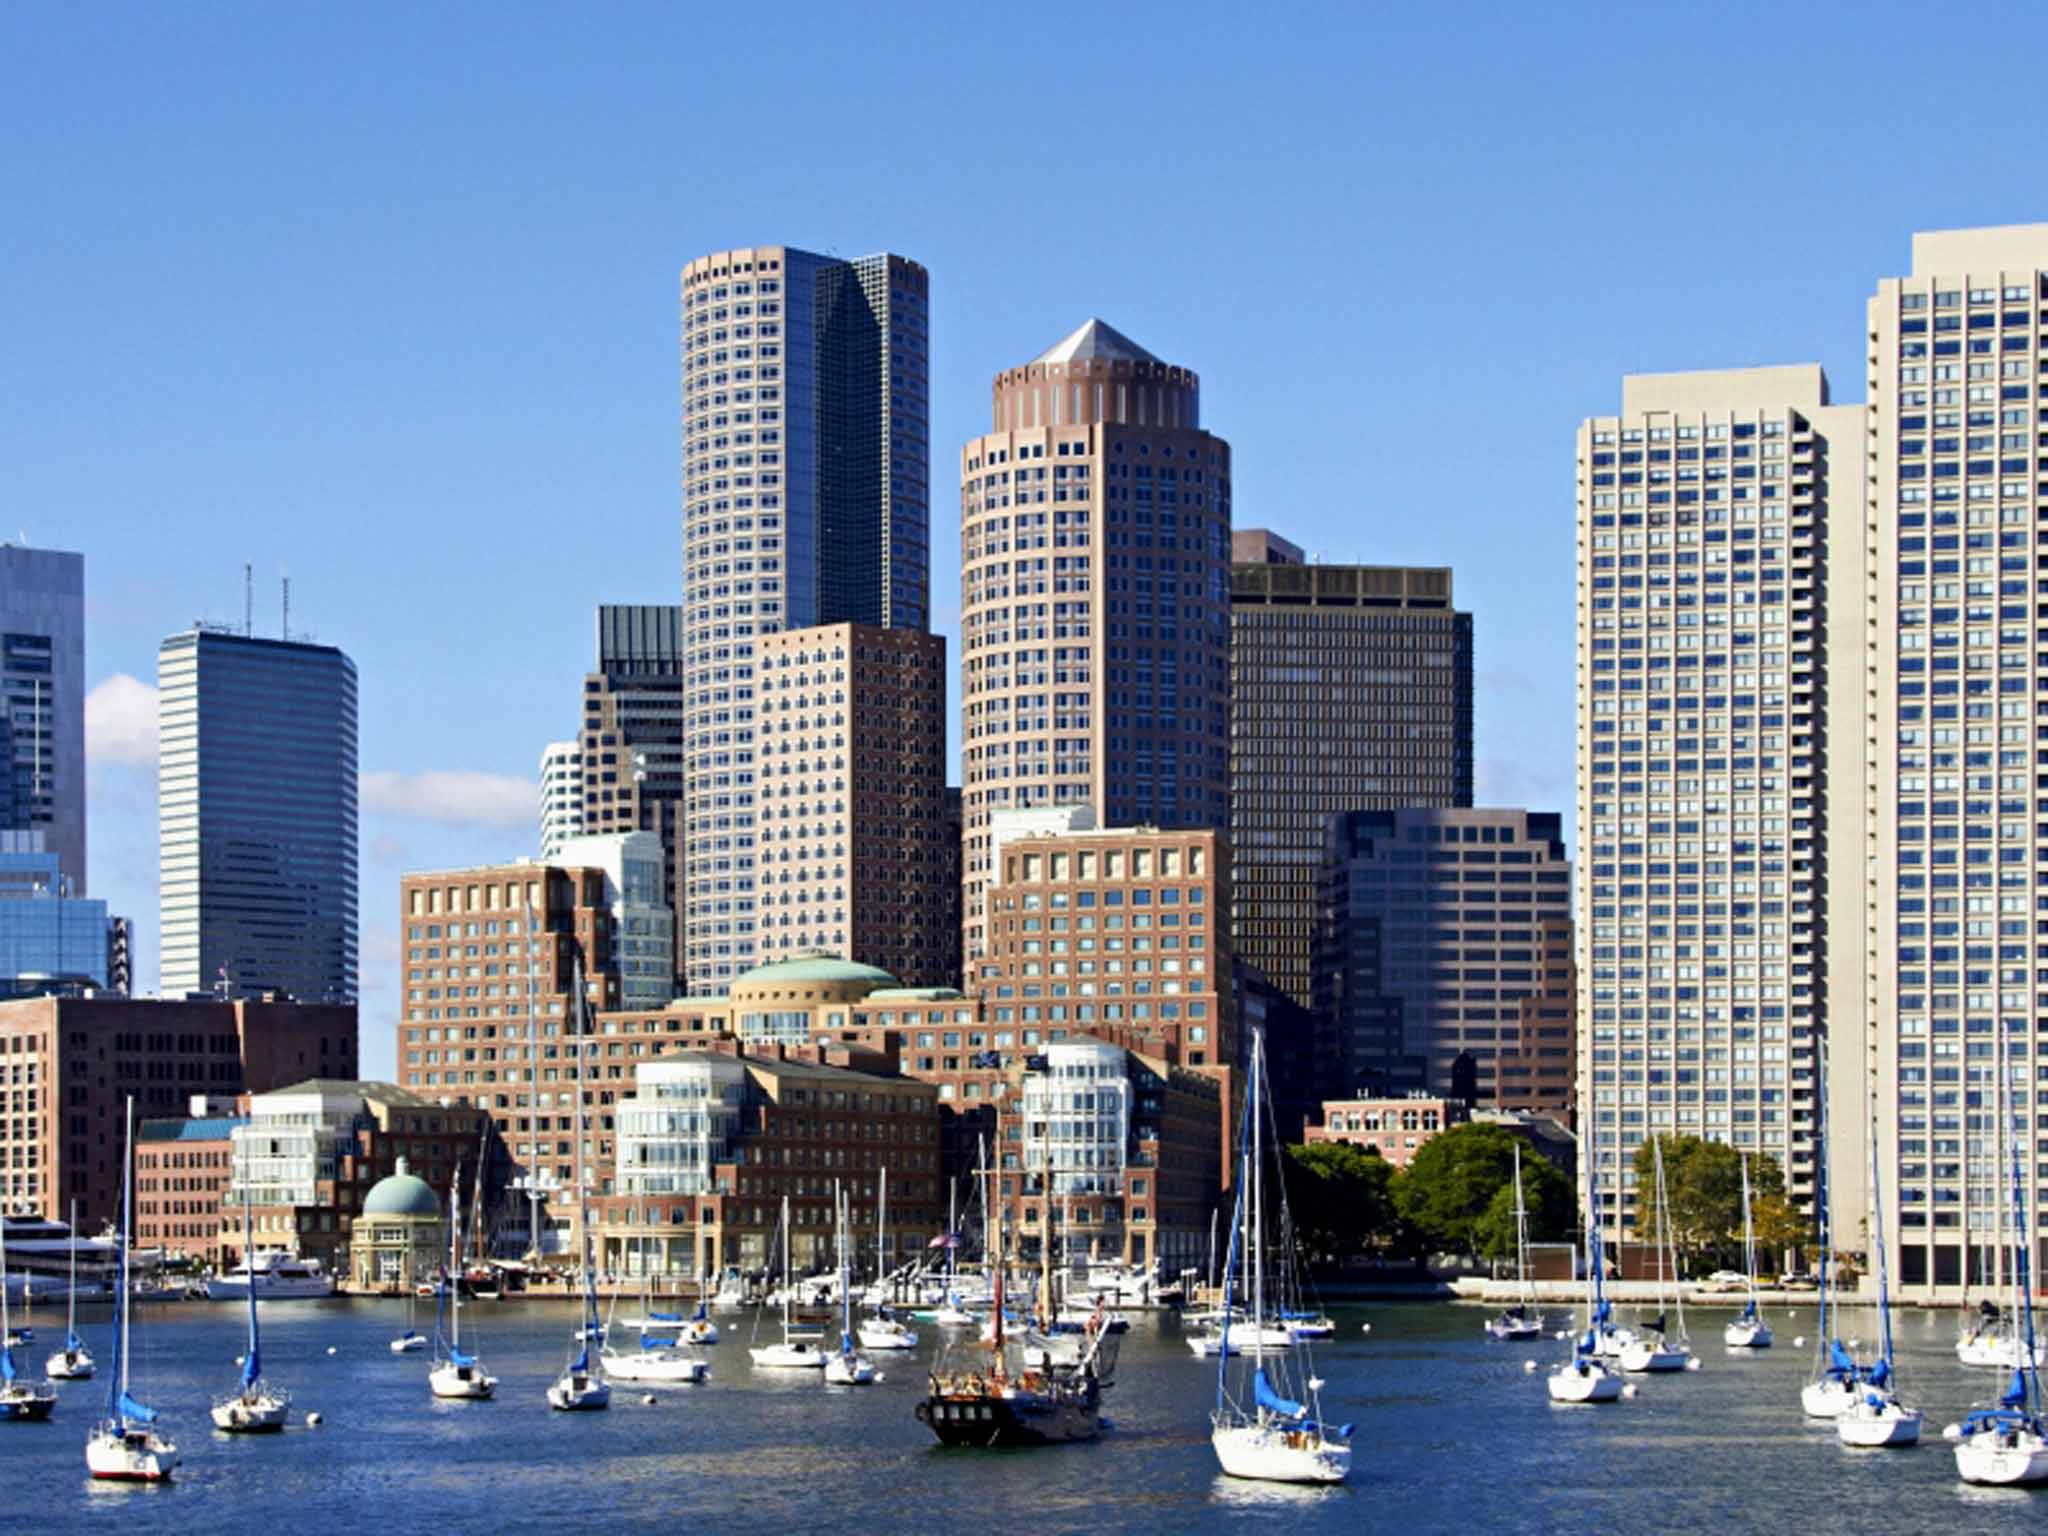 Harbour intentions: Boston's high-rise waterfront